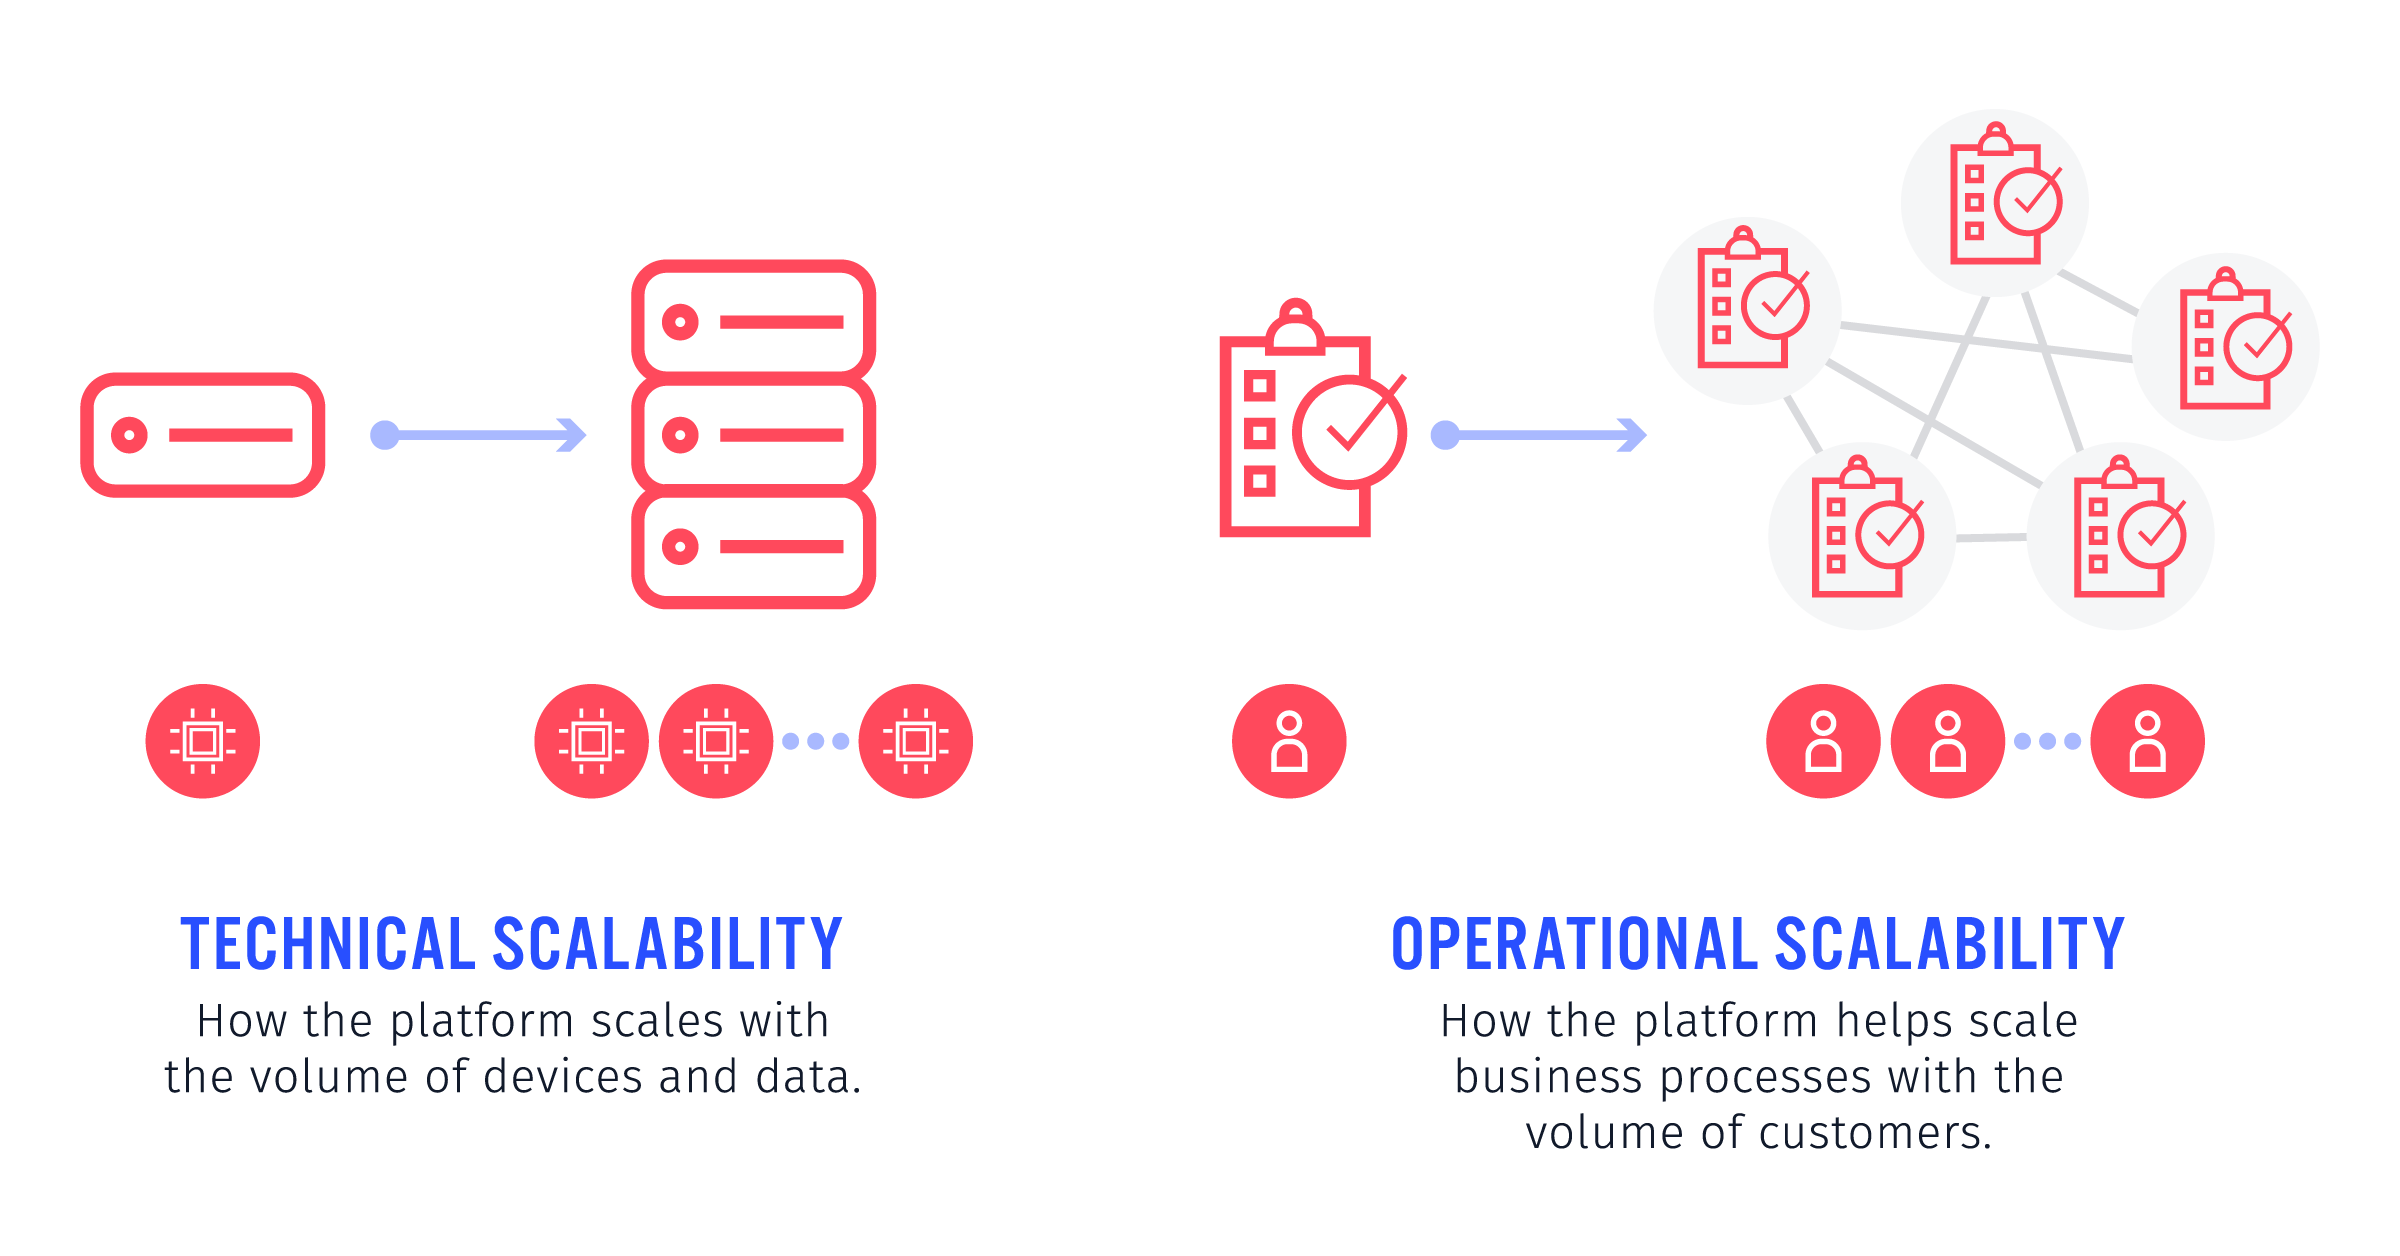 Architecture of an IoT Platform - Operational Scalability